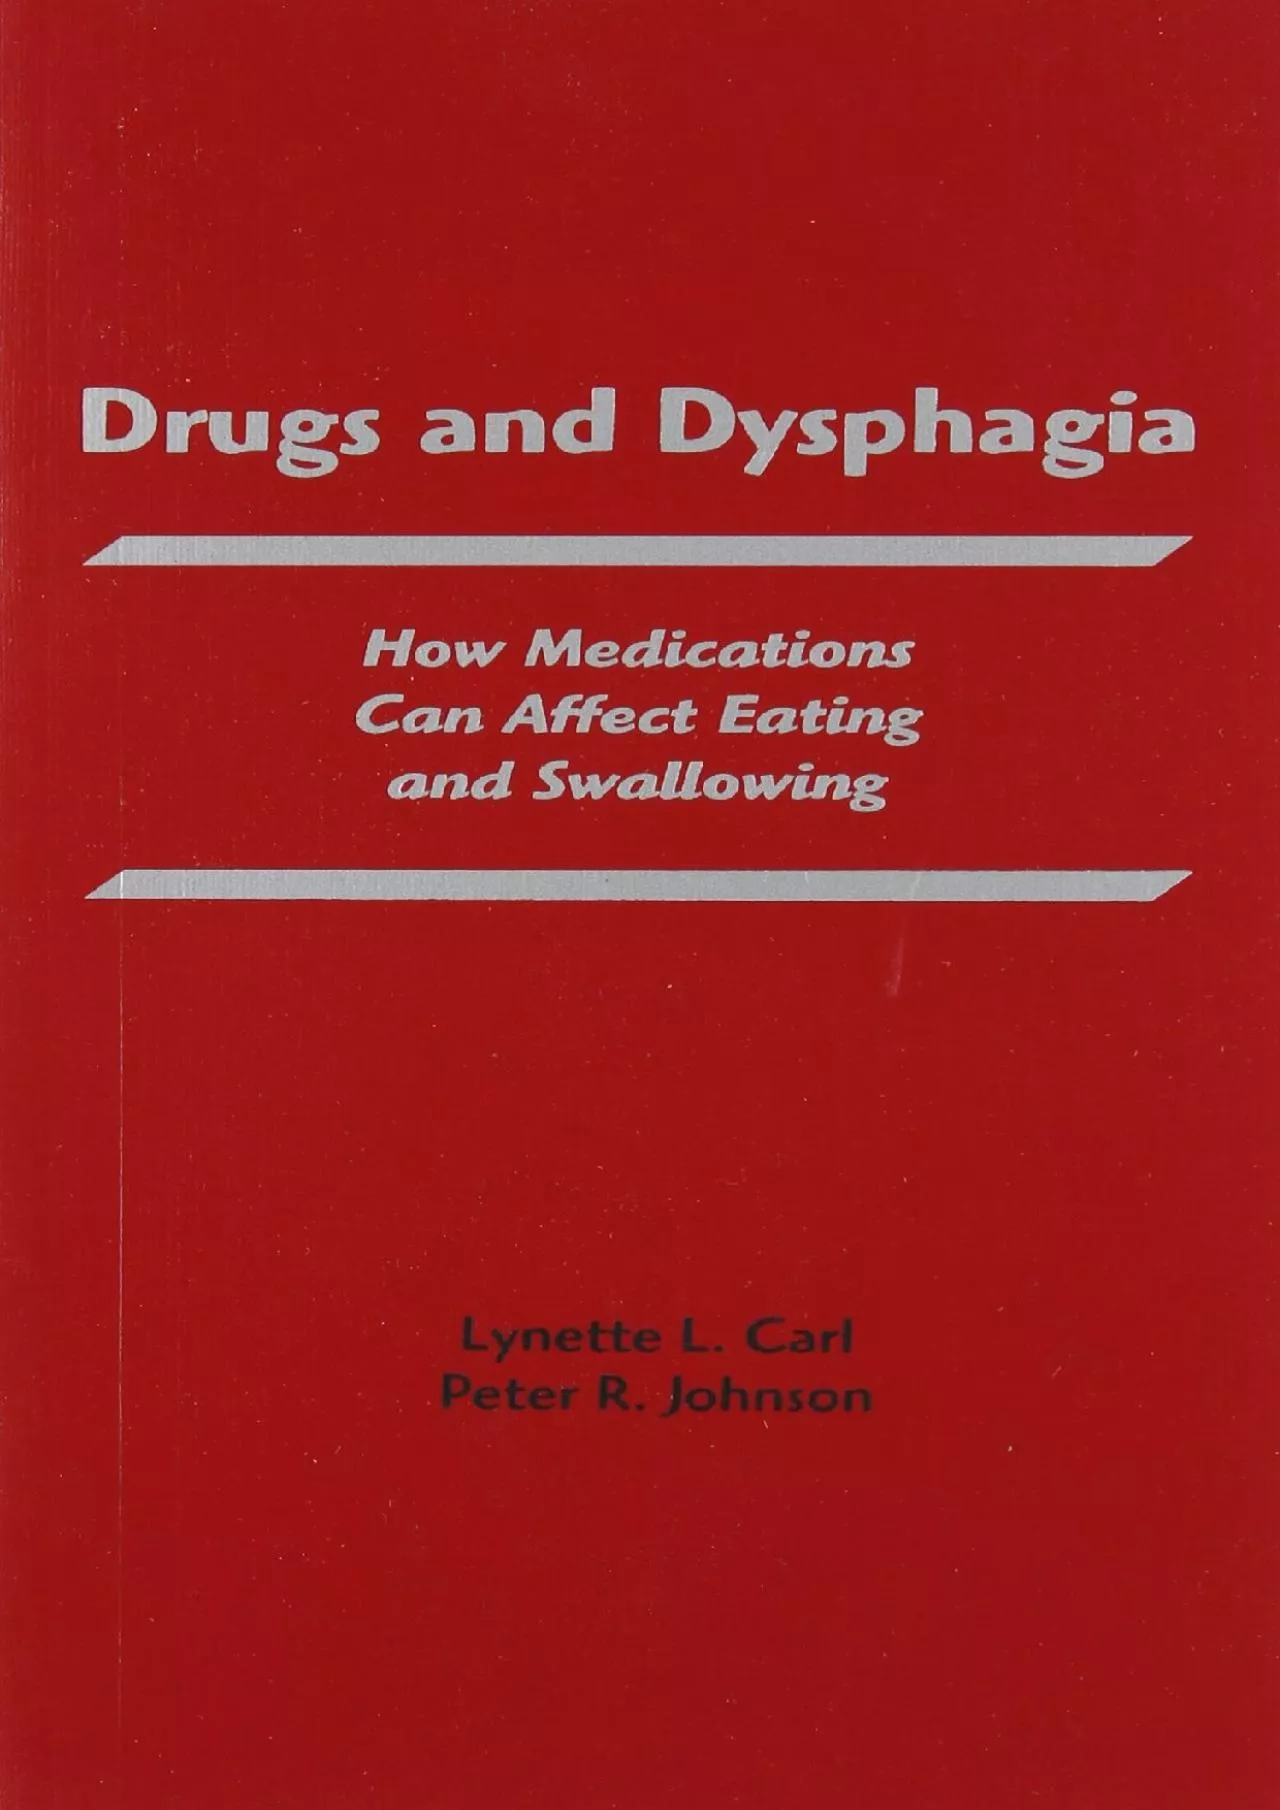 (BOOK)-Drugs and Dysphagia: How Medications Can Affect Eating and Swallowing (Carl, Drugs